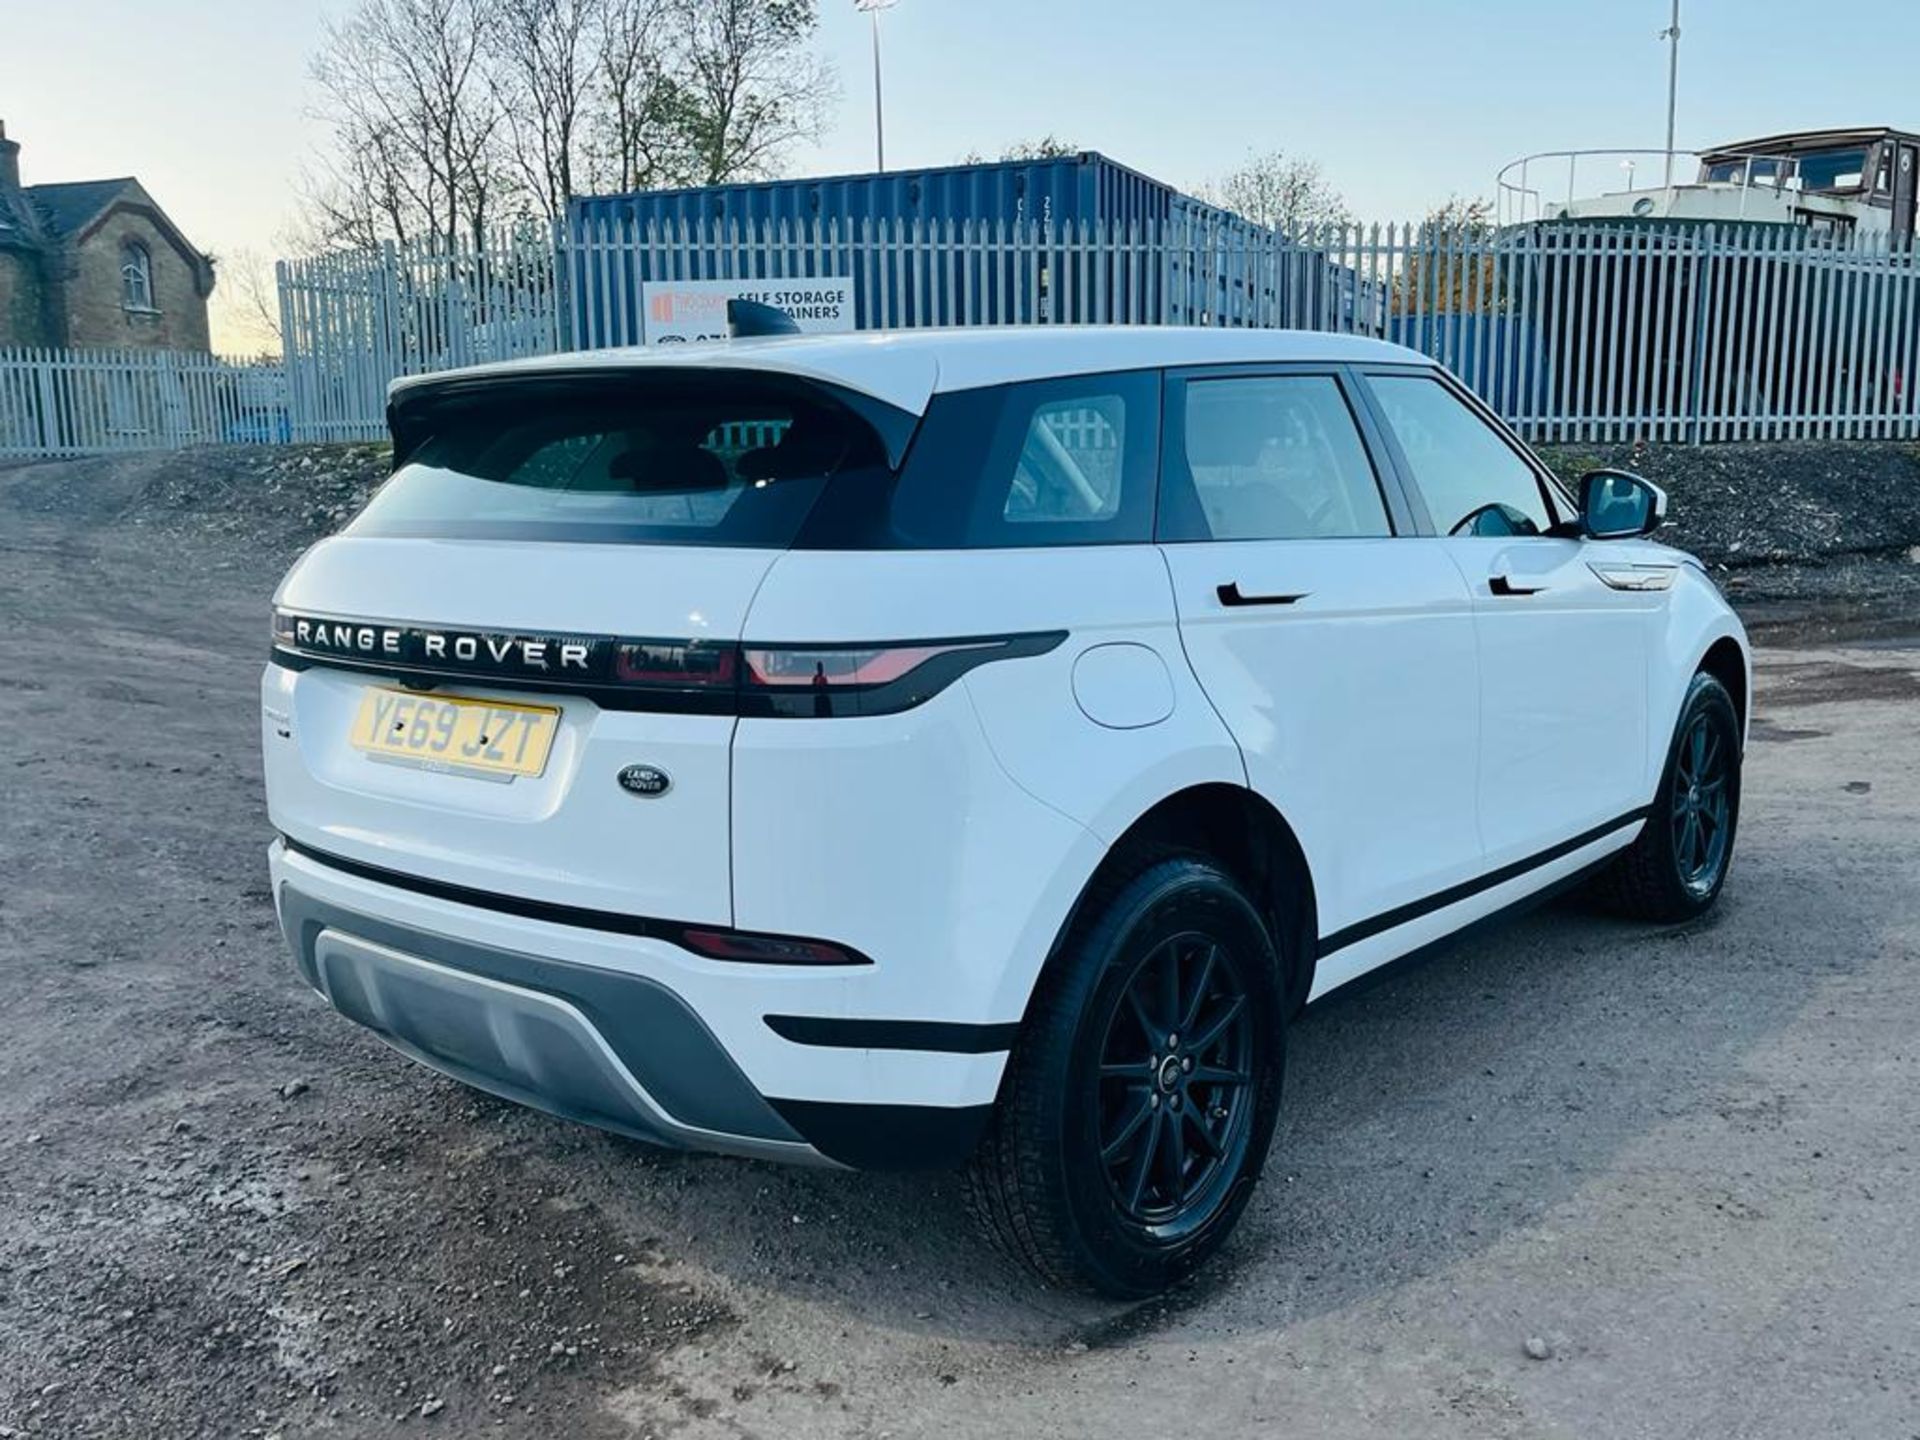 ** ON SALE ** Land Rover Range Rover Evoque 2.0 D150 2019 '69 Reg' A/C - Only 43,987 Miles - Image 9 of 32